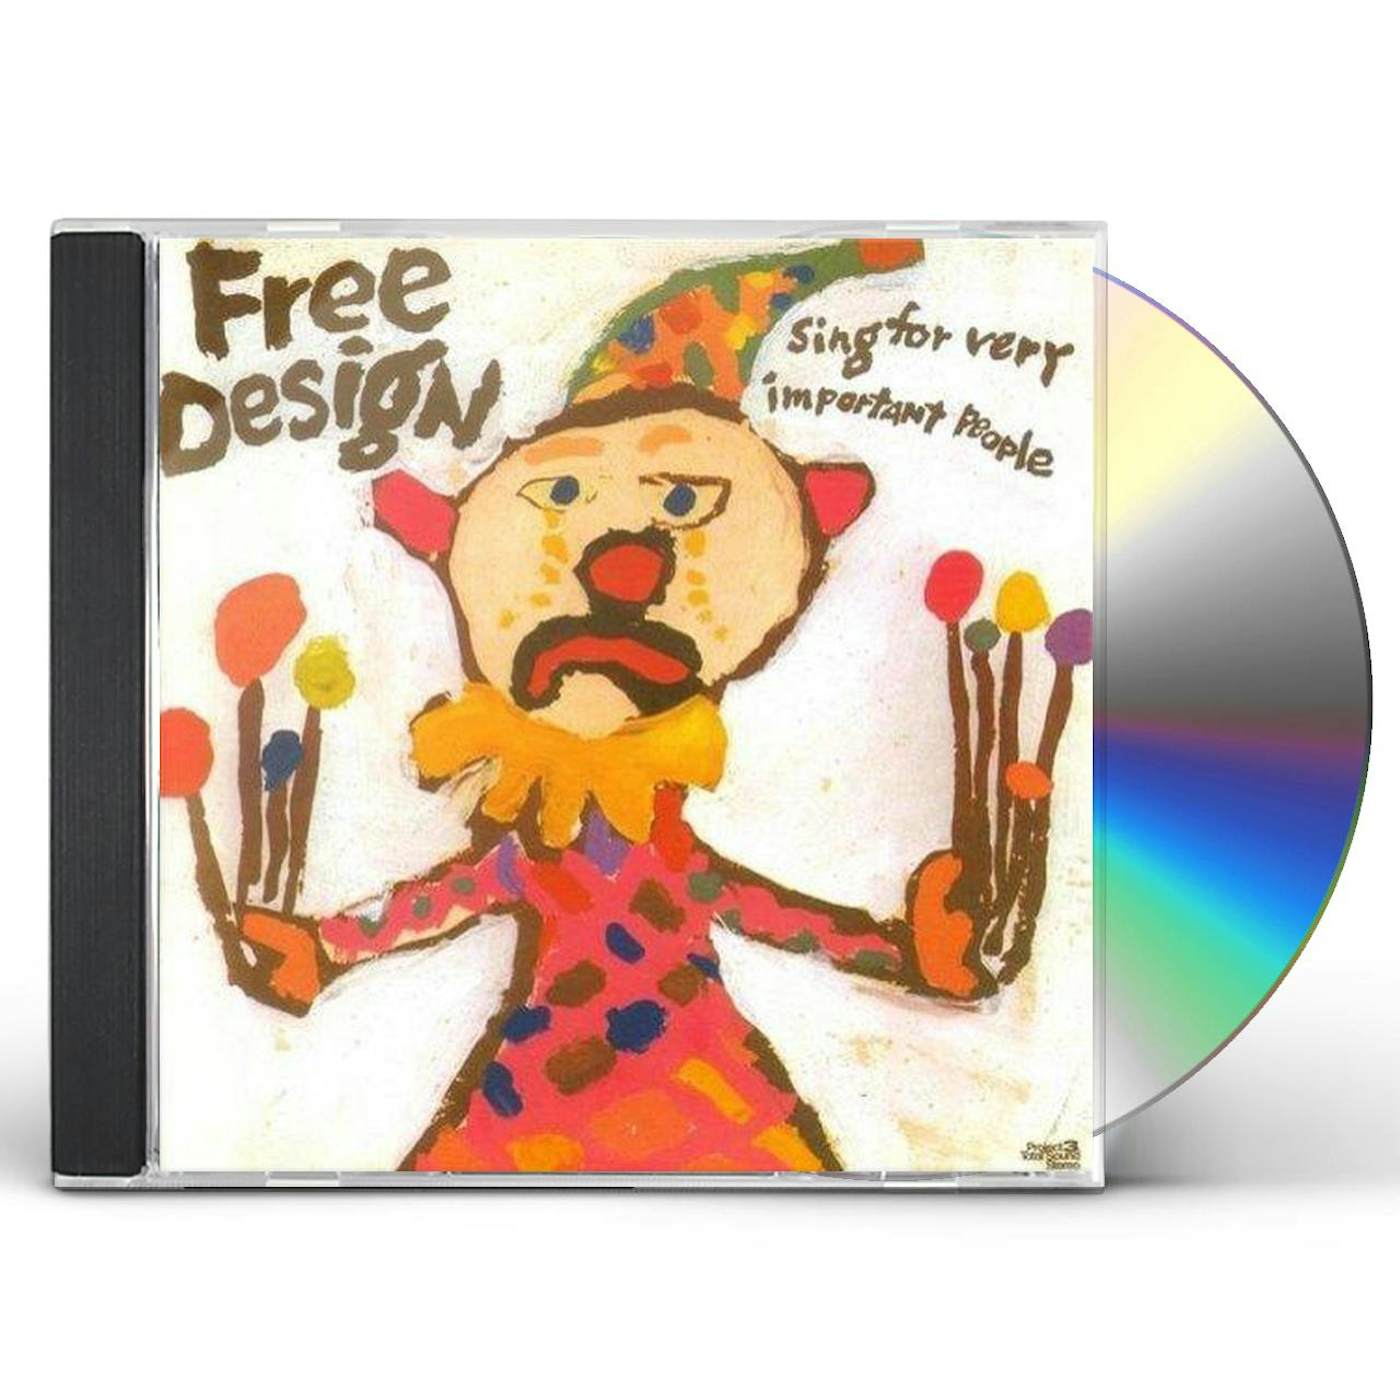 The Free Design SING FOR VERY IMPORTANT PEOPELE CD